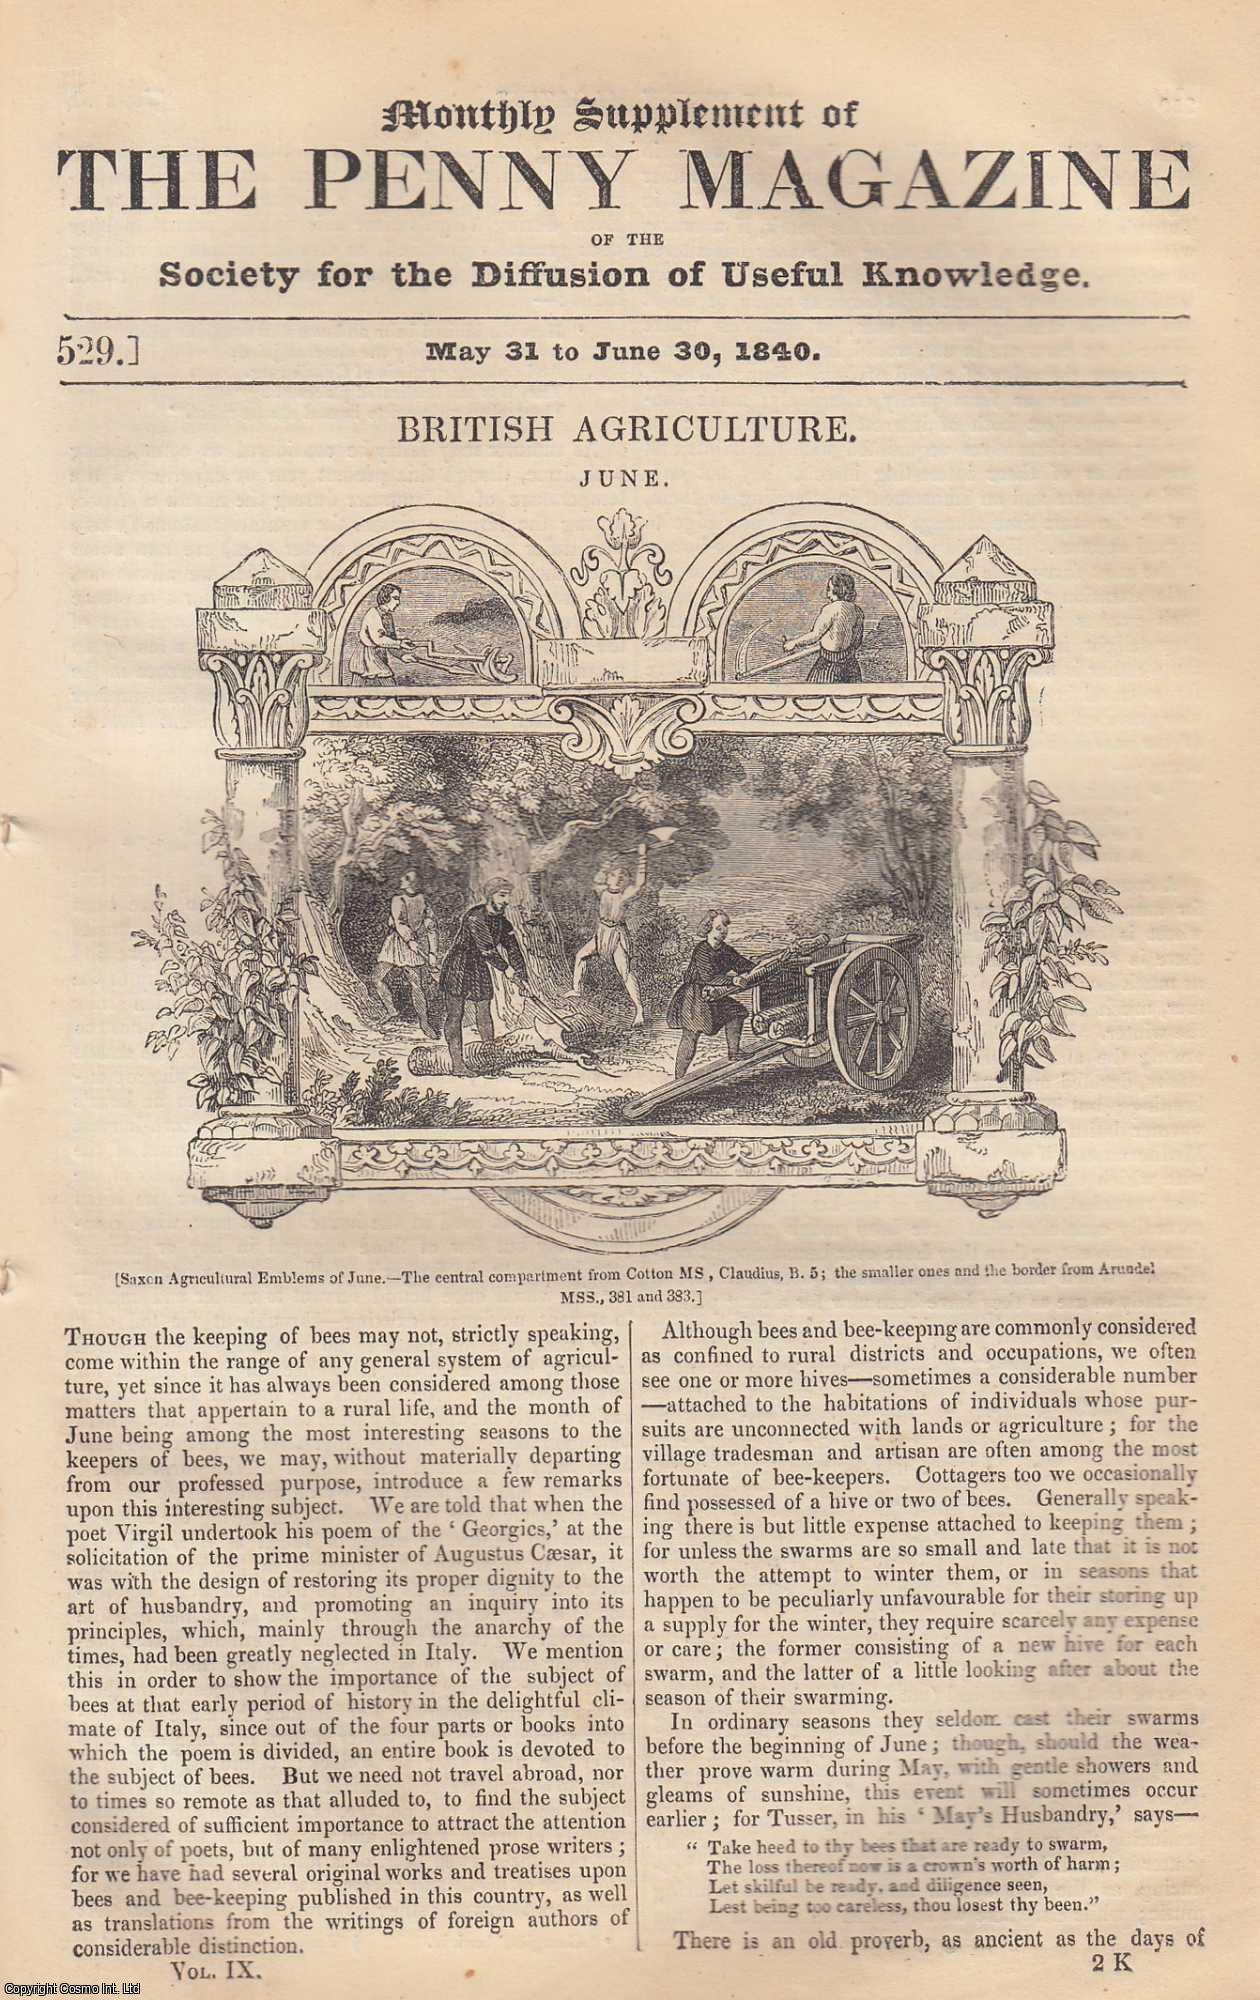 --- - British Agriculture (June). Issue No. 529, June 30th, 1840. A complete rare weekly issue of the Penny Magazine, 1840.